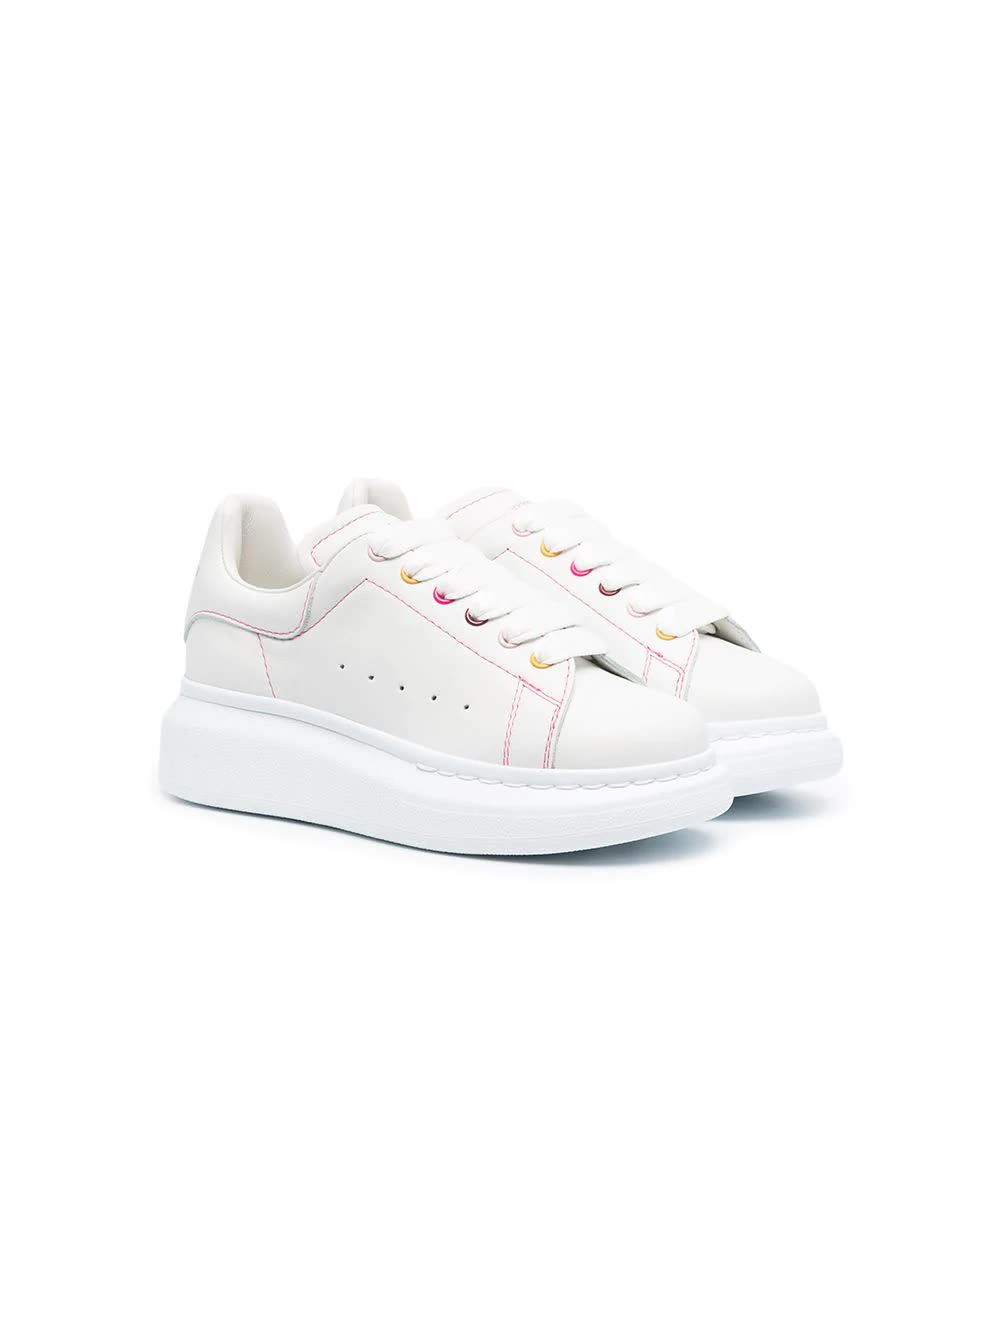 Buy Alexander McQueen Kid White Oversize Sneakers With Multicolor Eyelets online, shop Alexander McQueen shoes with free shipping